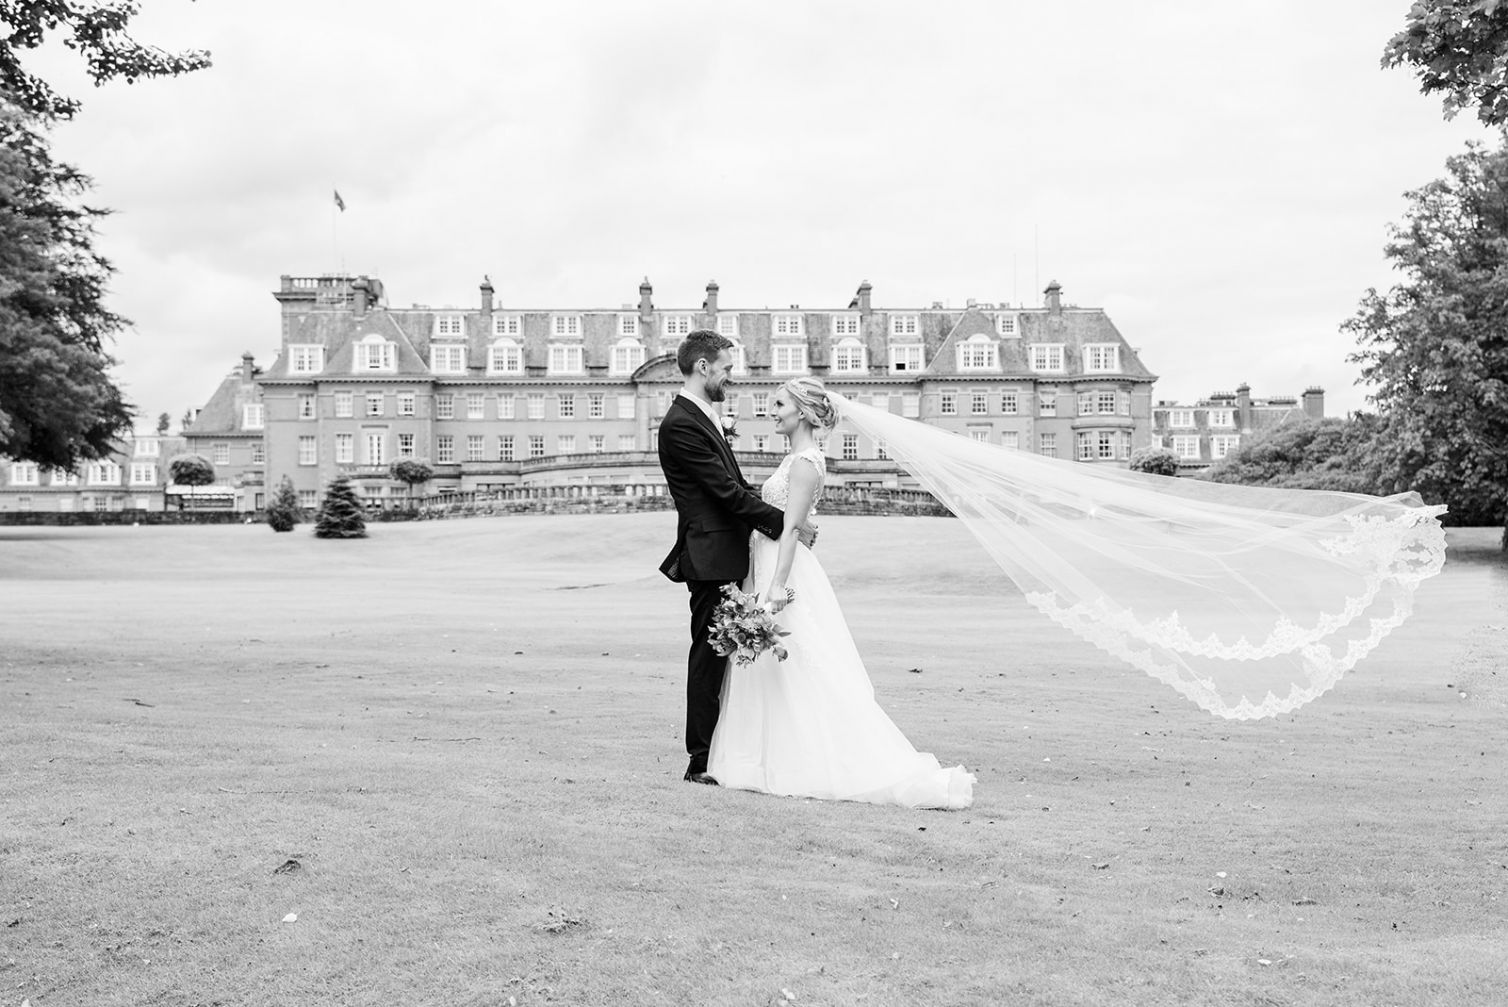 Katie and James' lovely Gleneagles wedding